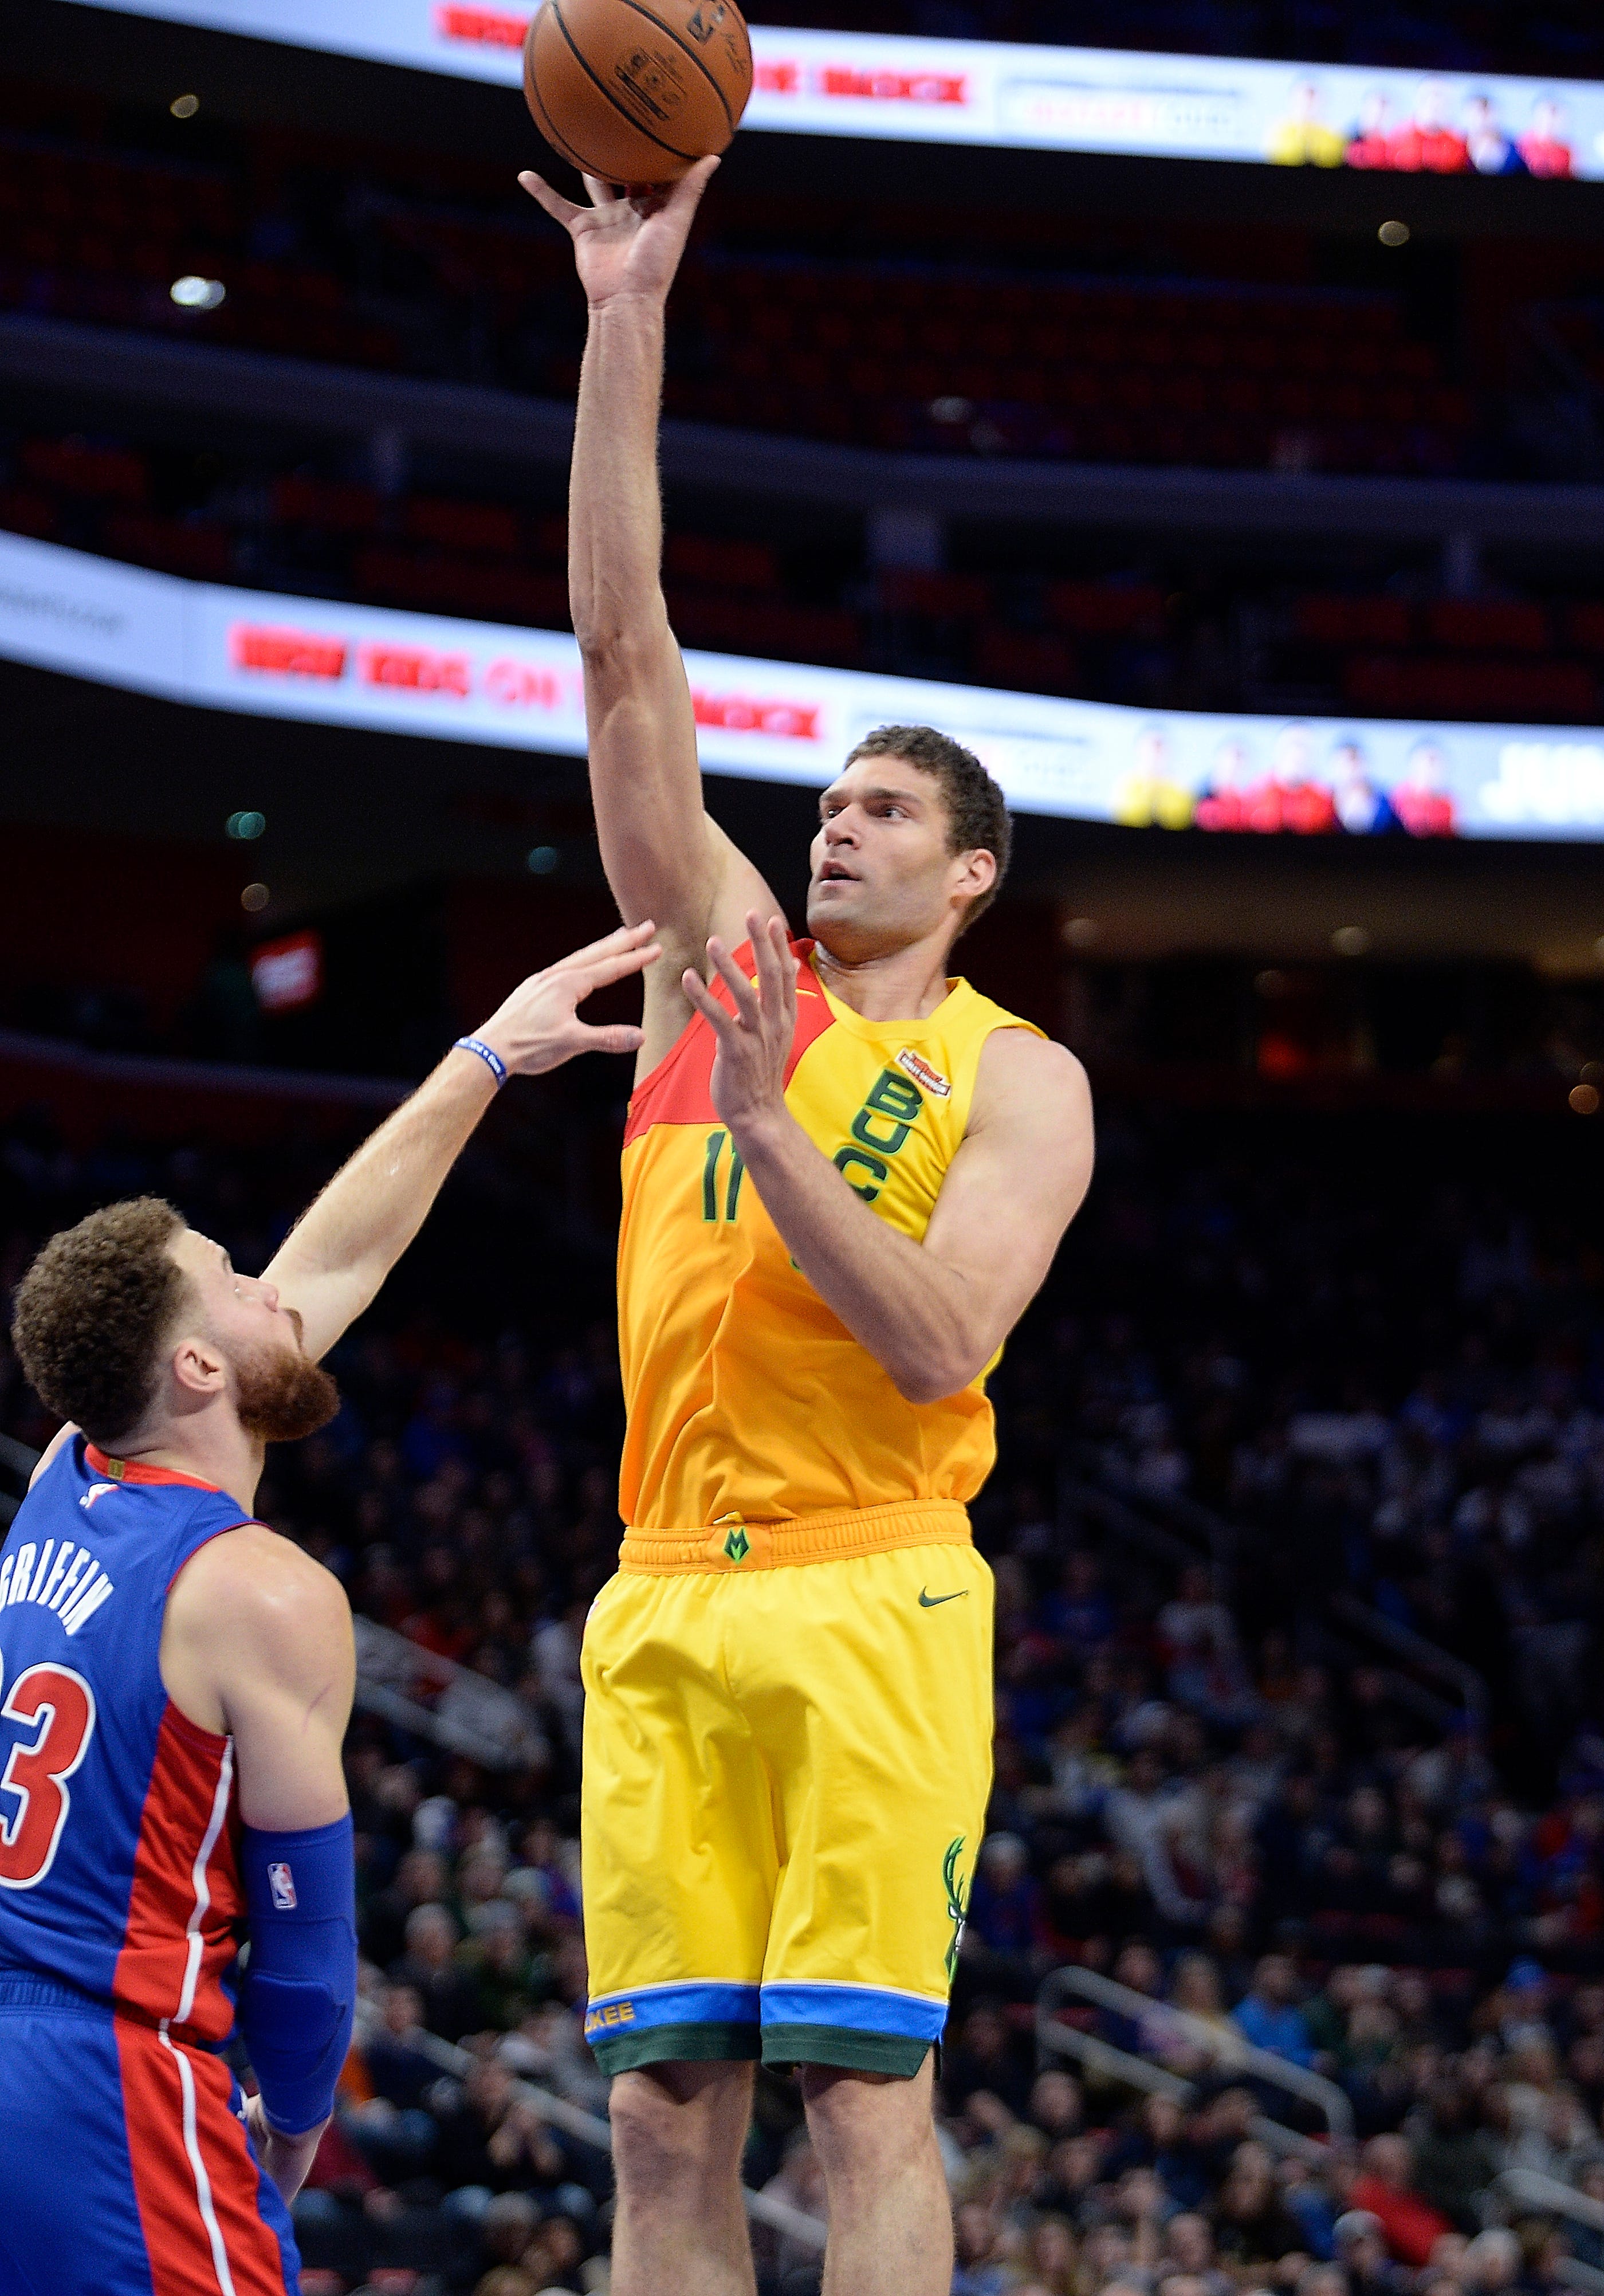 Bucks' Brook Lopez scores over Pistons' Blake Griffin in the first quarter.